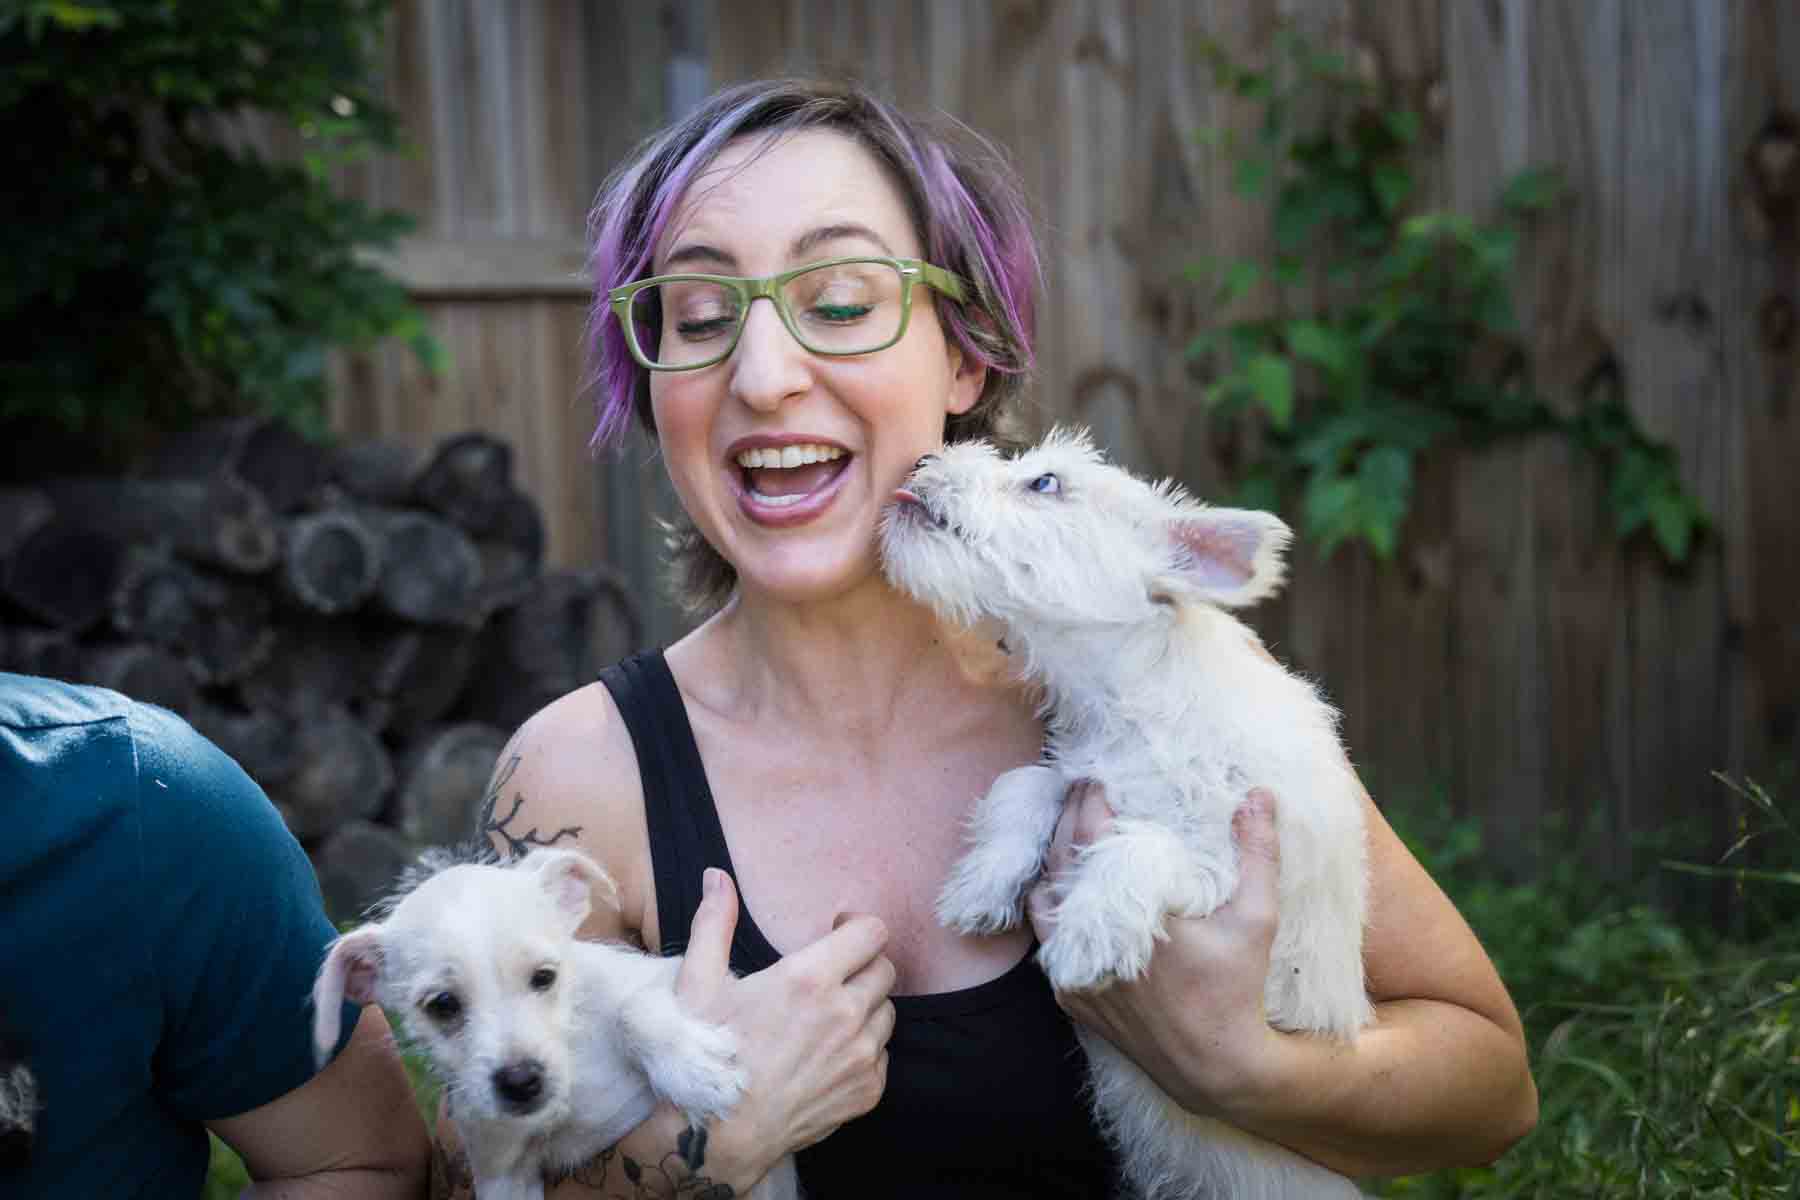 Woman with purple hair and glasses holding two white puppies for an article on pet photo tips